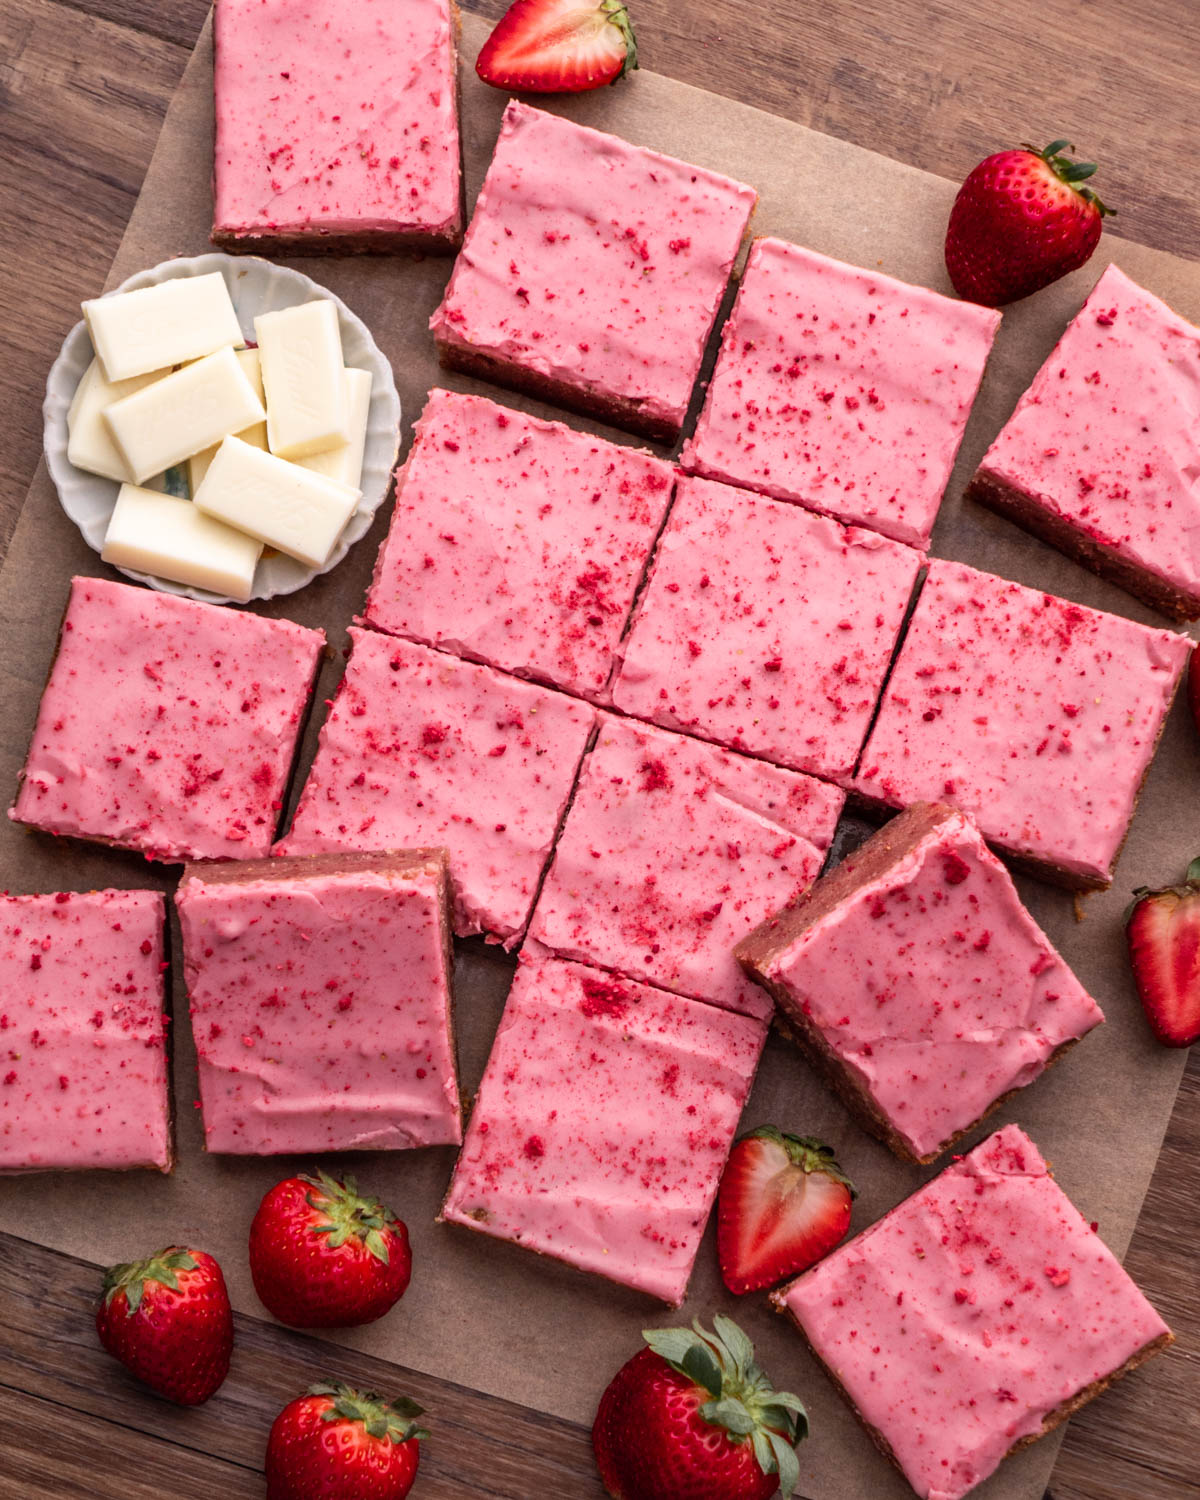 strawberry brownies arranged on parchment paper with strawberries and white chocolate around